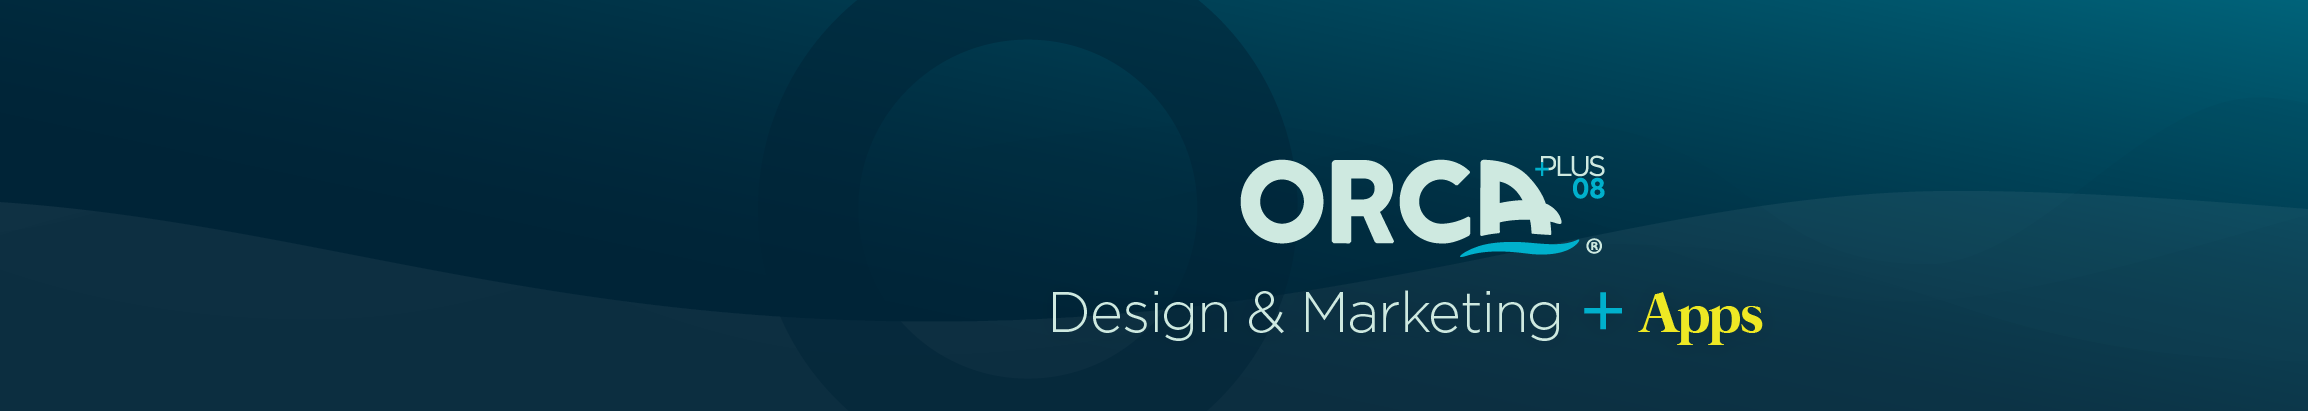 ORCA+ Be Creative's profile banner